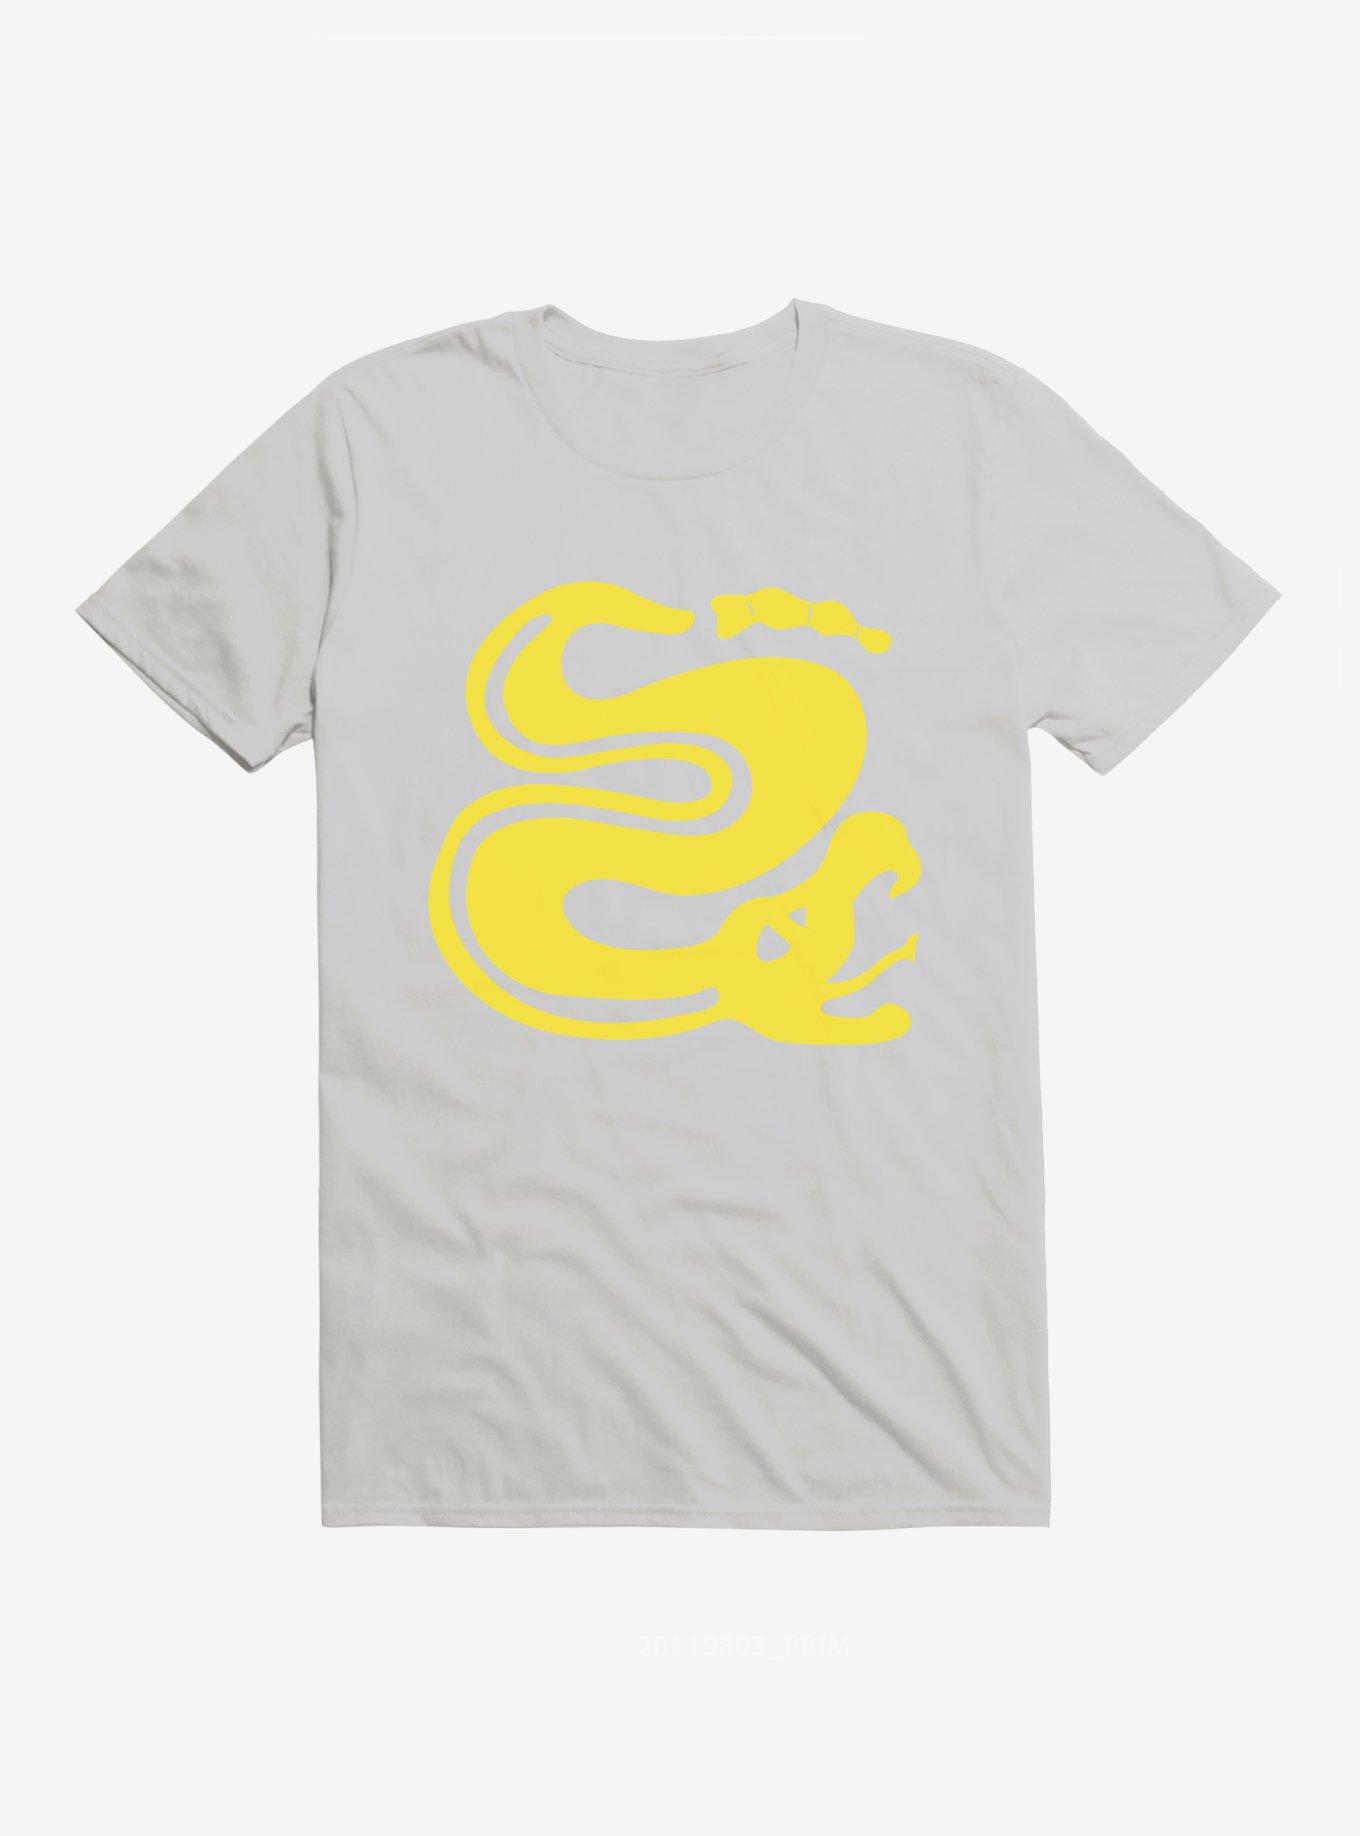 Legends Of The Hidden Temple Silver Snakess T-Shirt, SILVER, hi-res